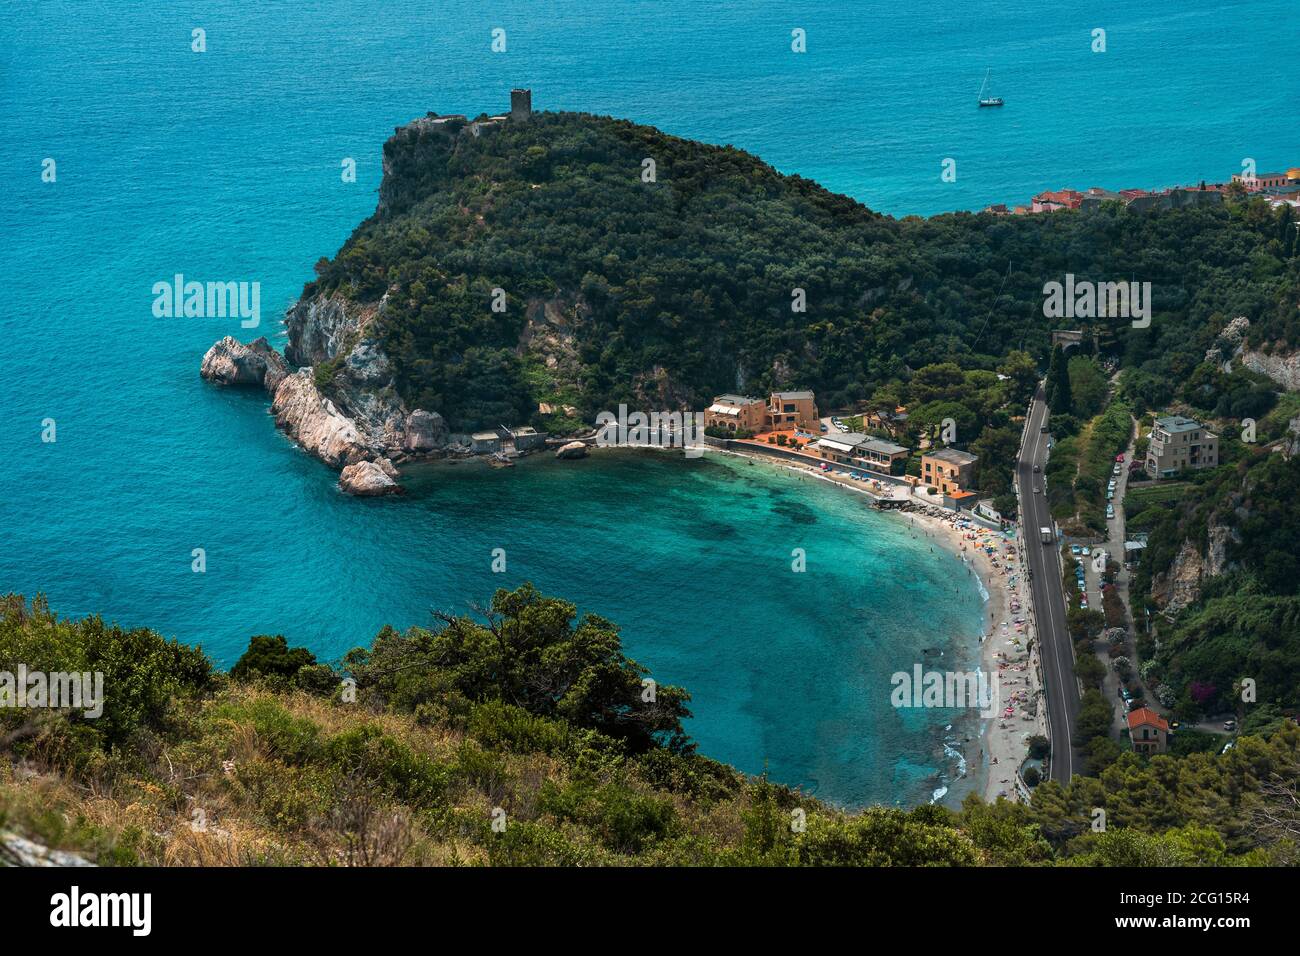 The beach of Varigotti (Finale Ligure) seen from a scenic trial on the hills Stock Photo